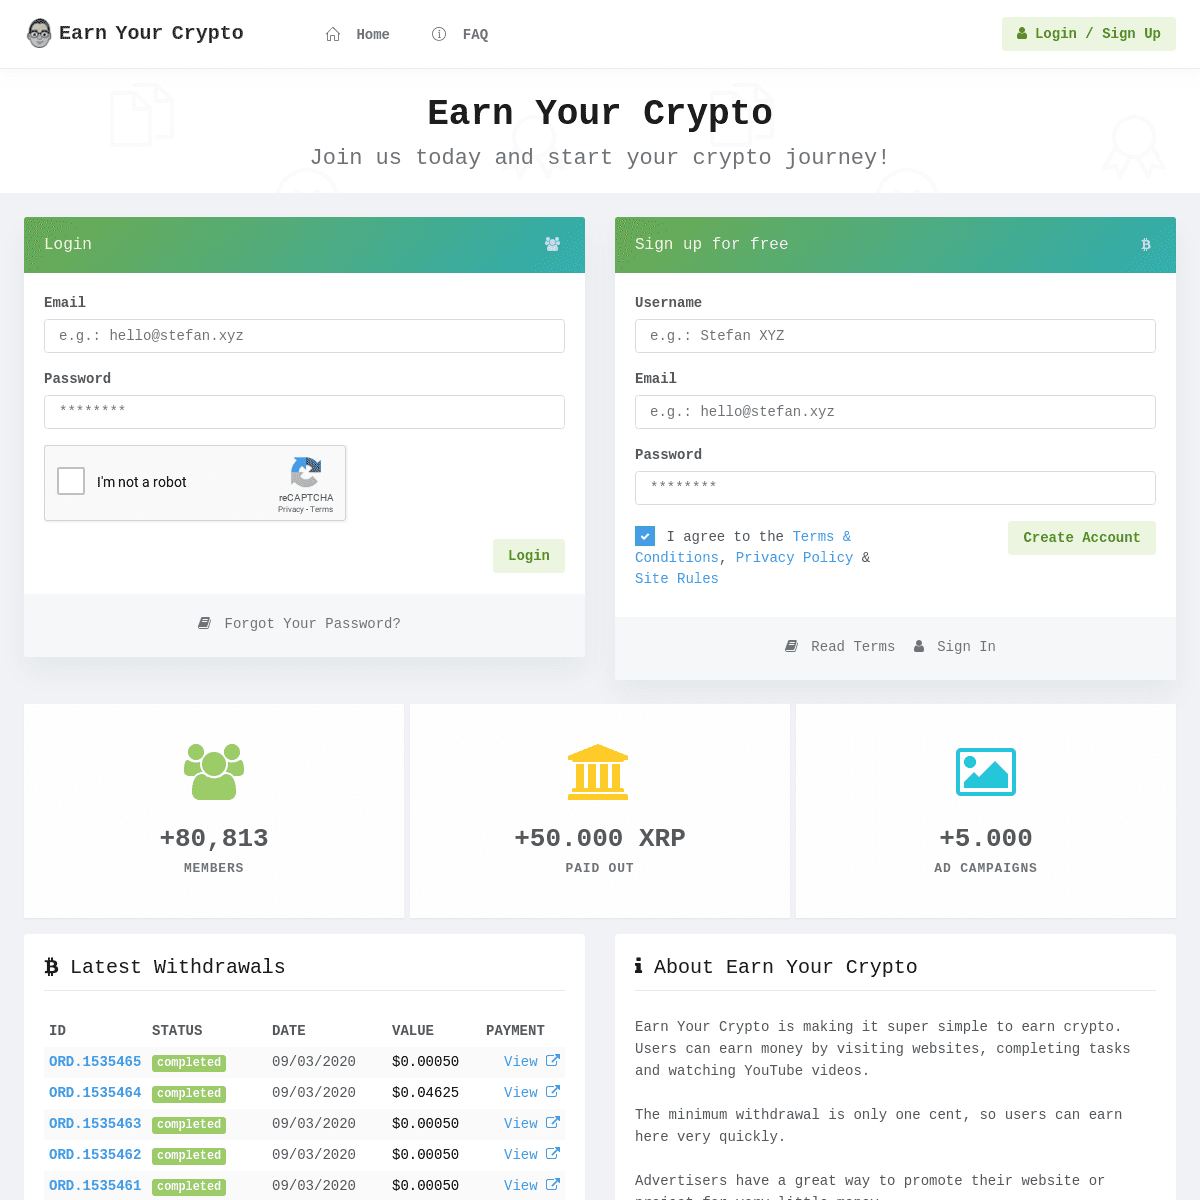 A complete backup of earnyourcrypto.com